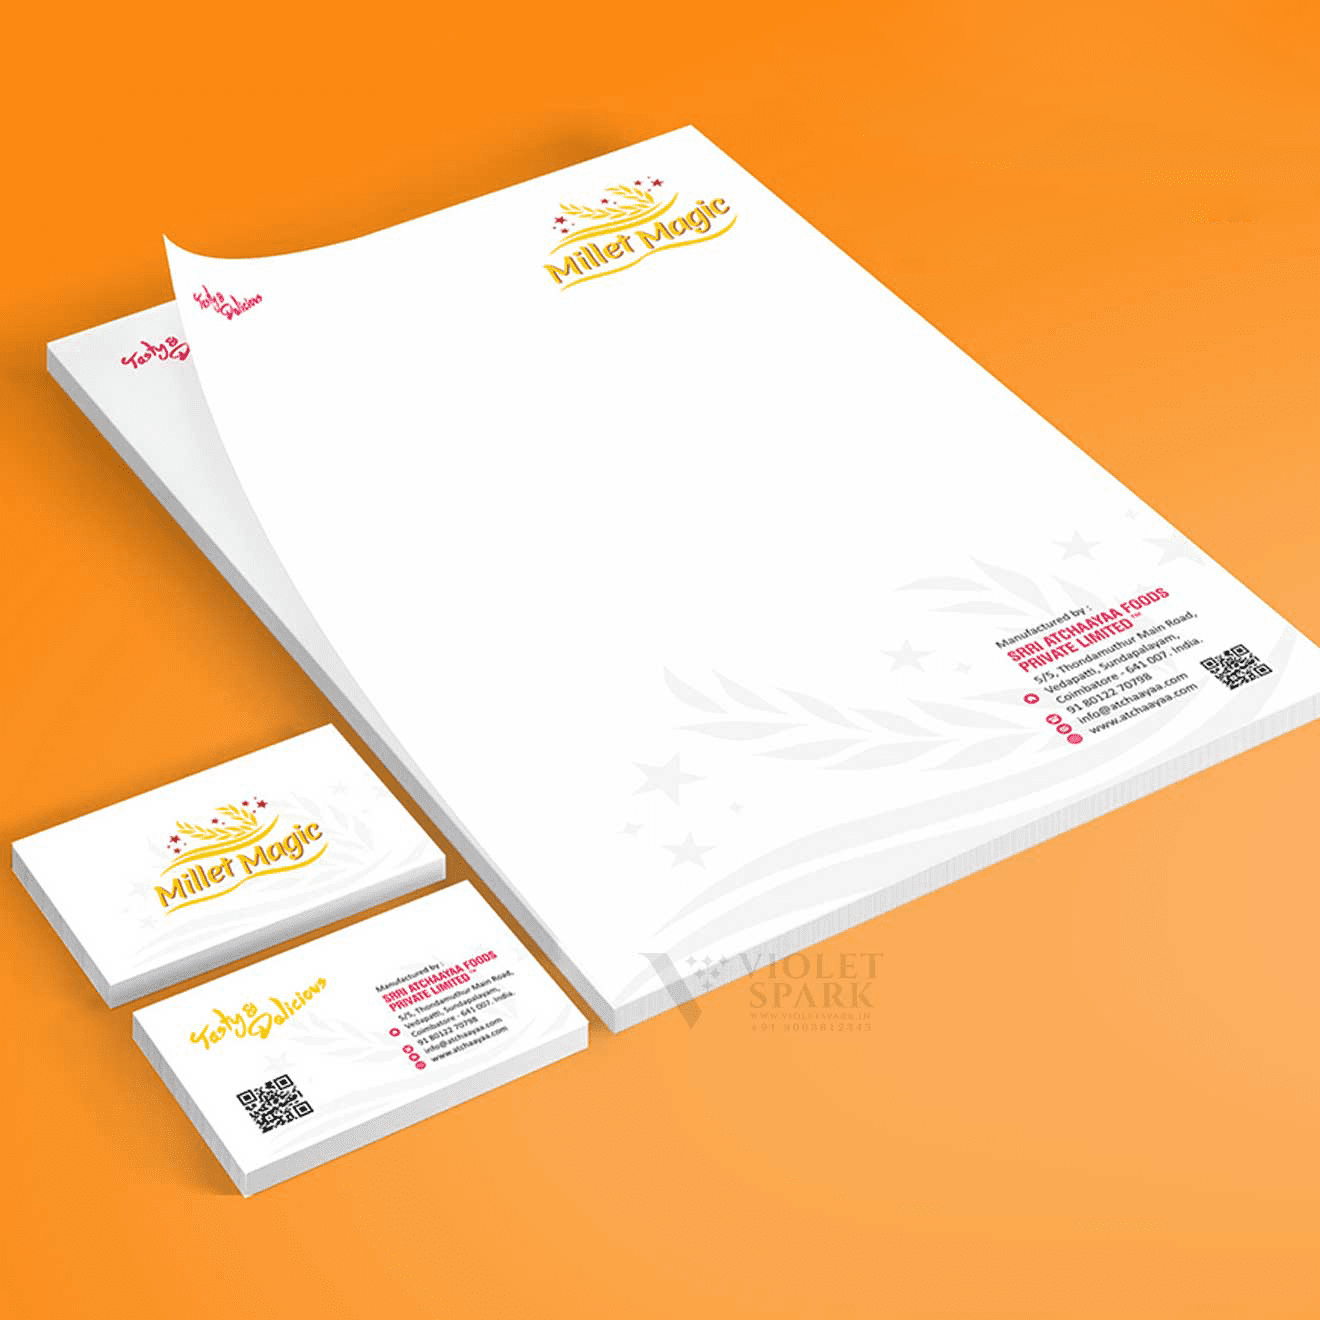 Millet Magic Letter Head and Visiting Card Branding Packaging Design Digital Marketing in Coimbatore by Violet Spark